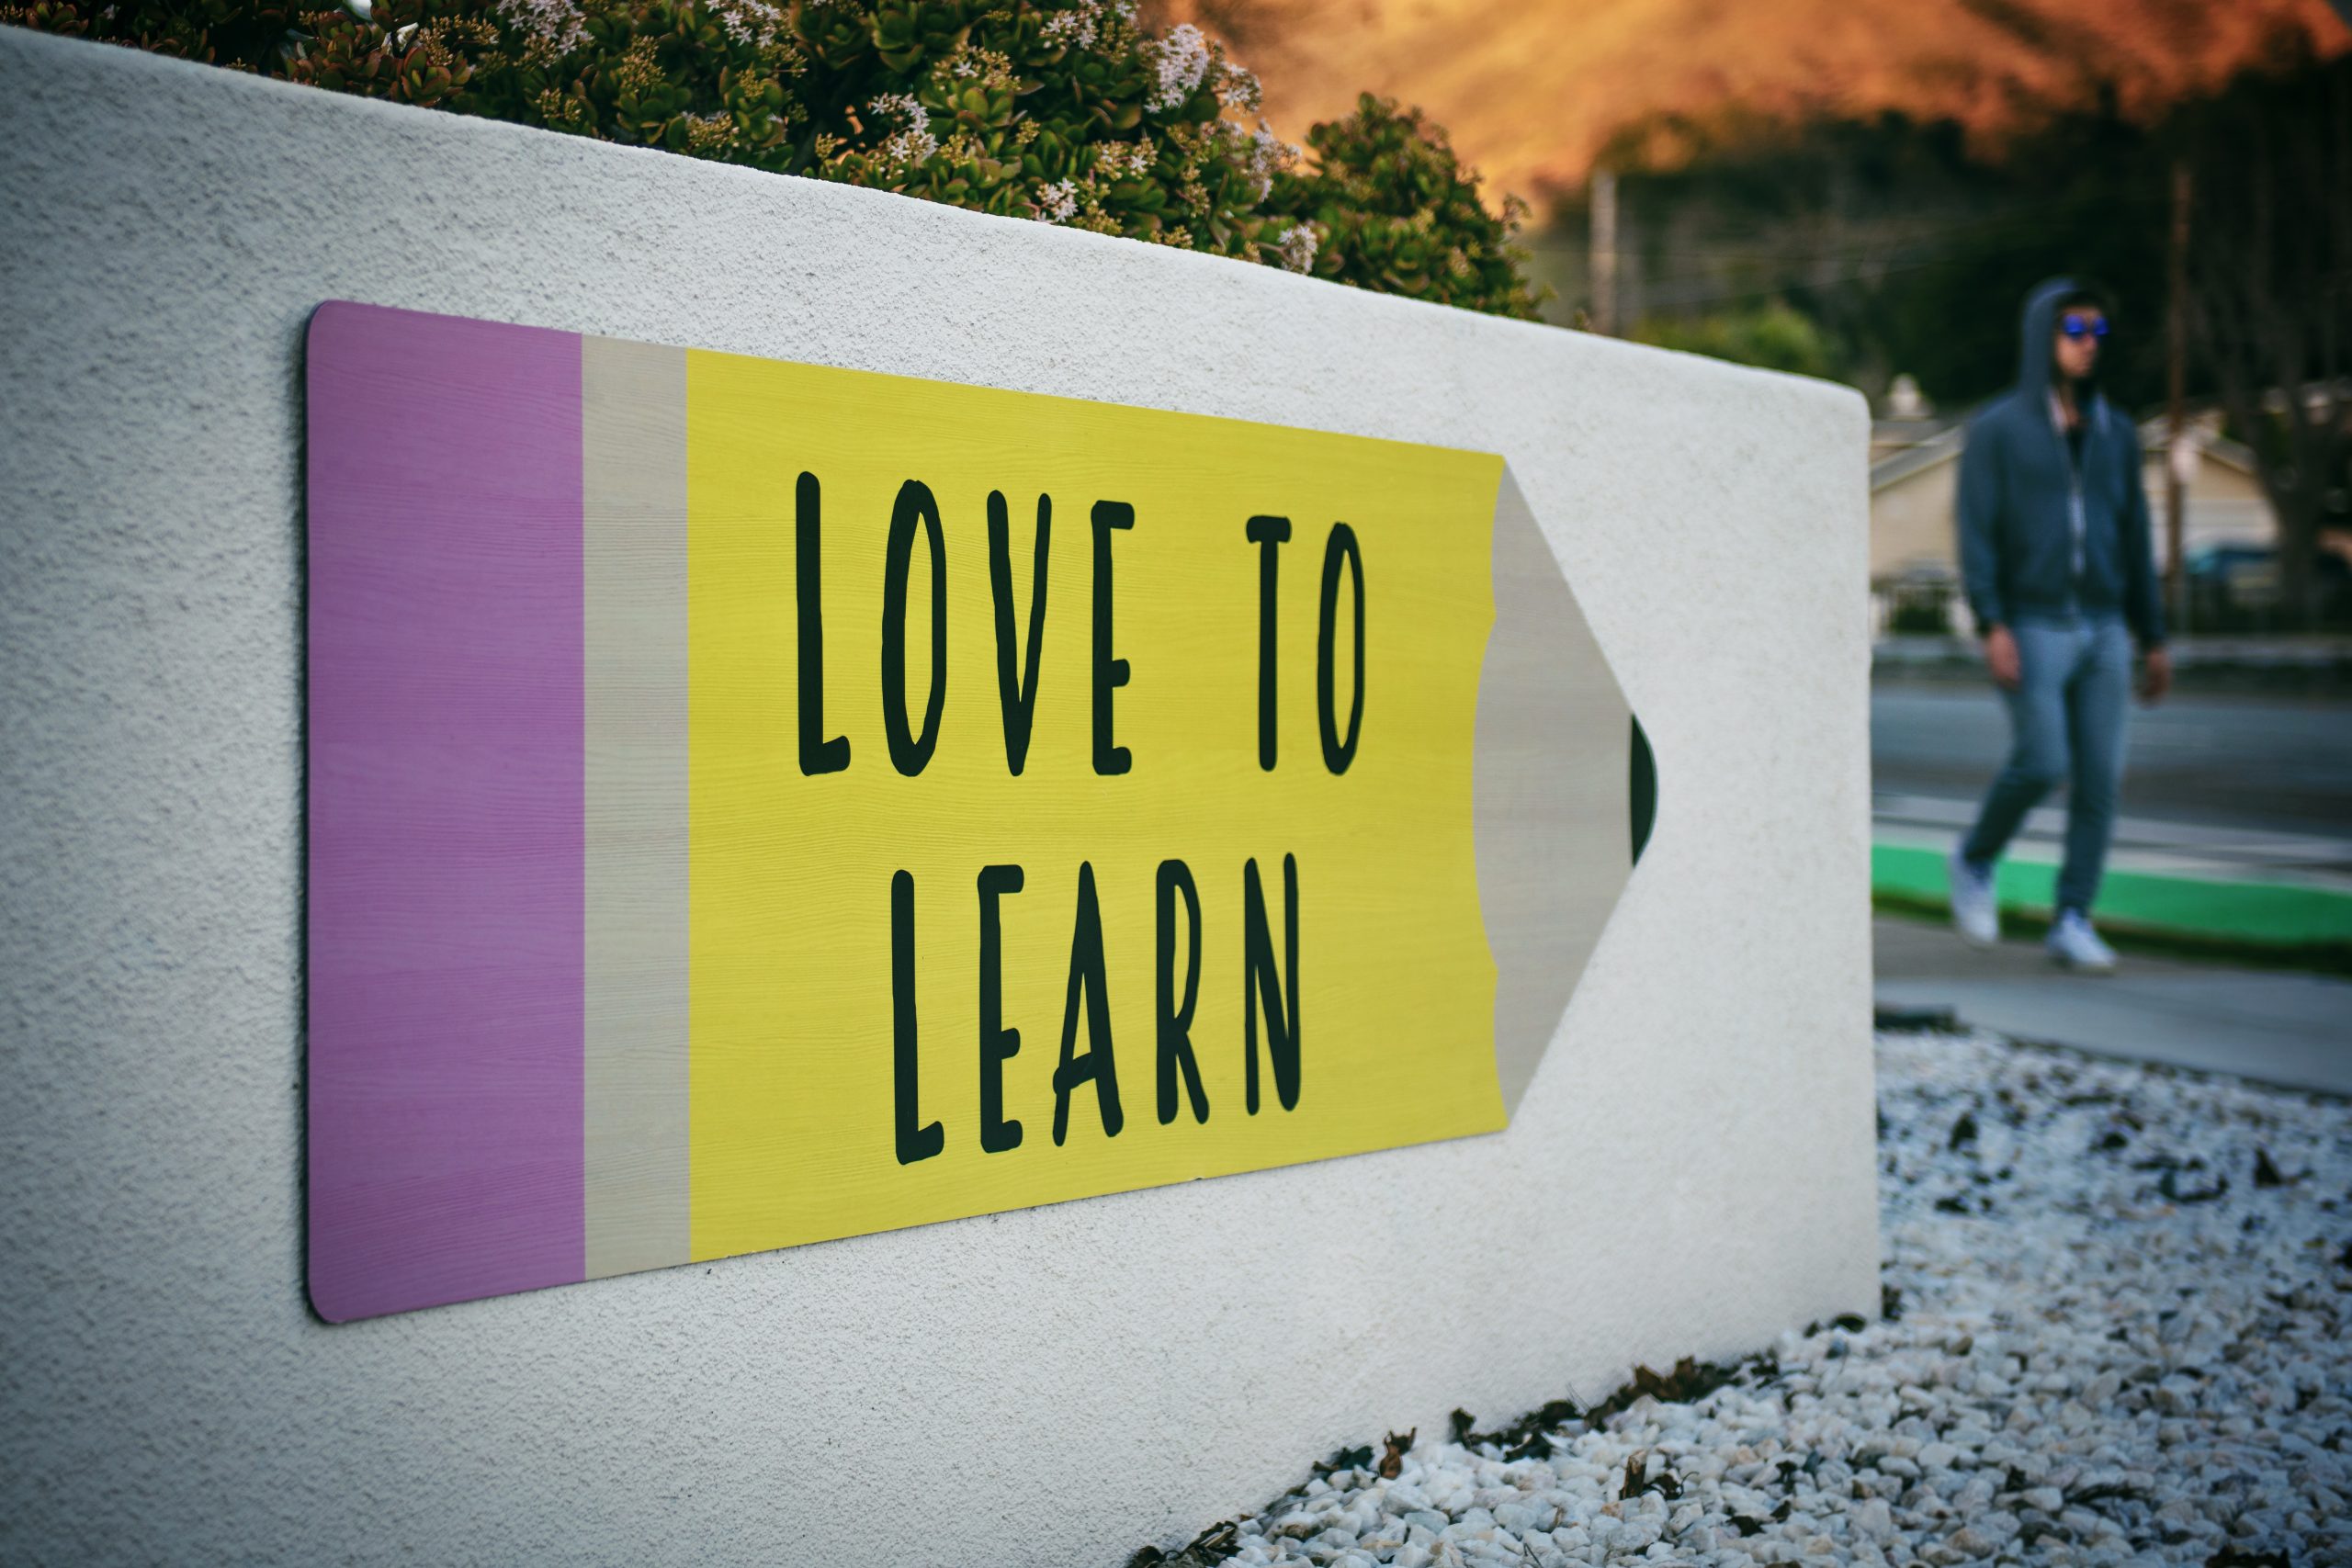 sign with large pencil that says "Love to Learn"